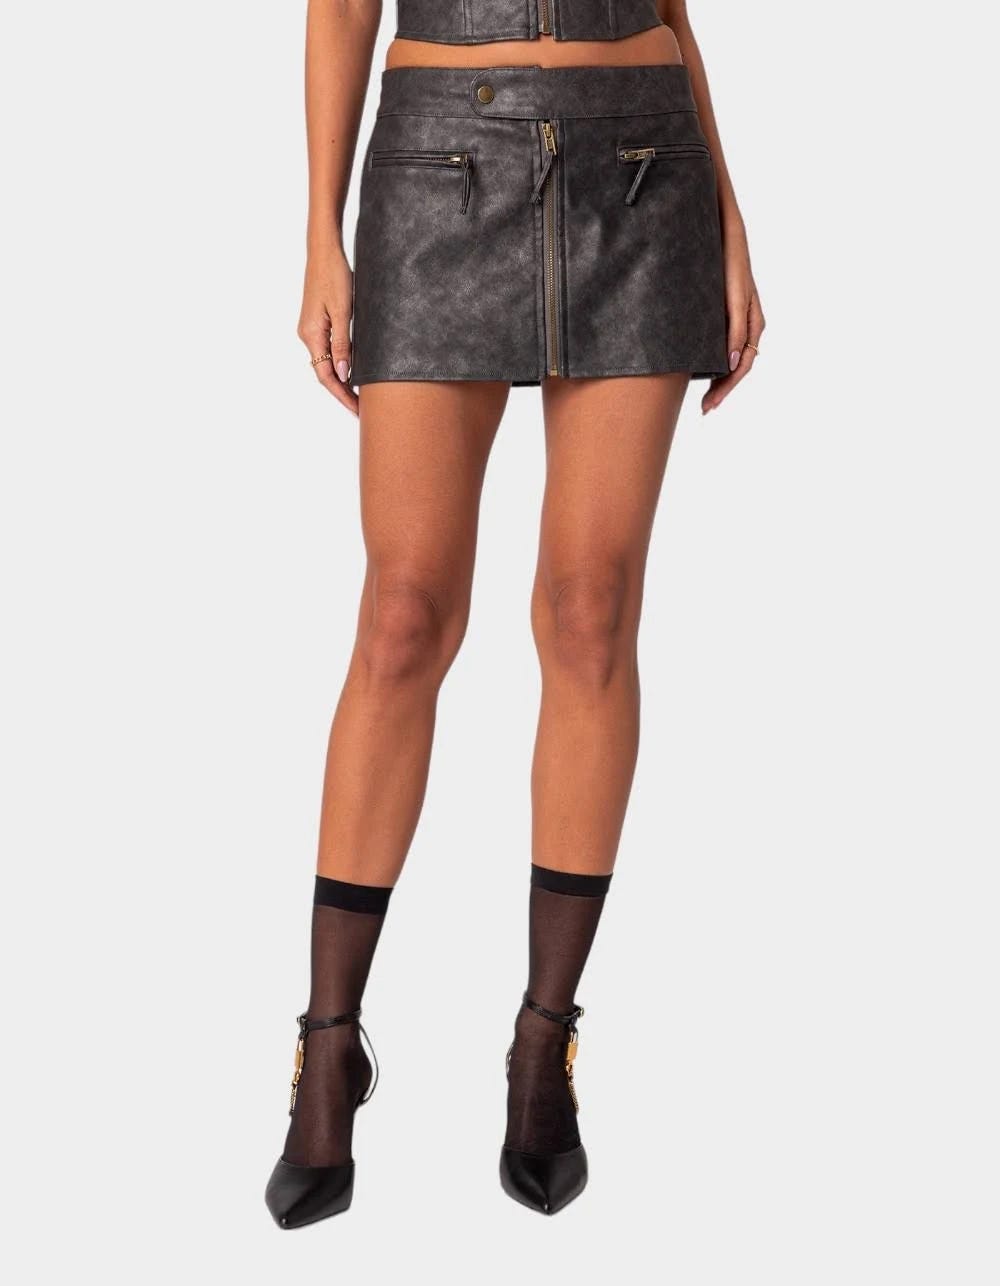 Classic Black Faux Leather Mini Skirt with Snap Buttons and Zip Pockets | Image